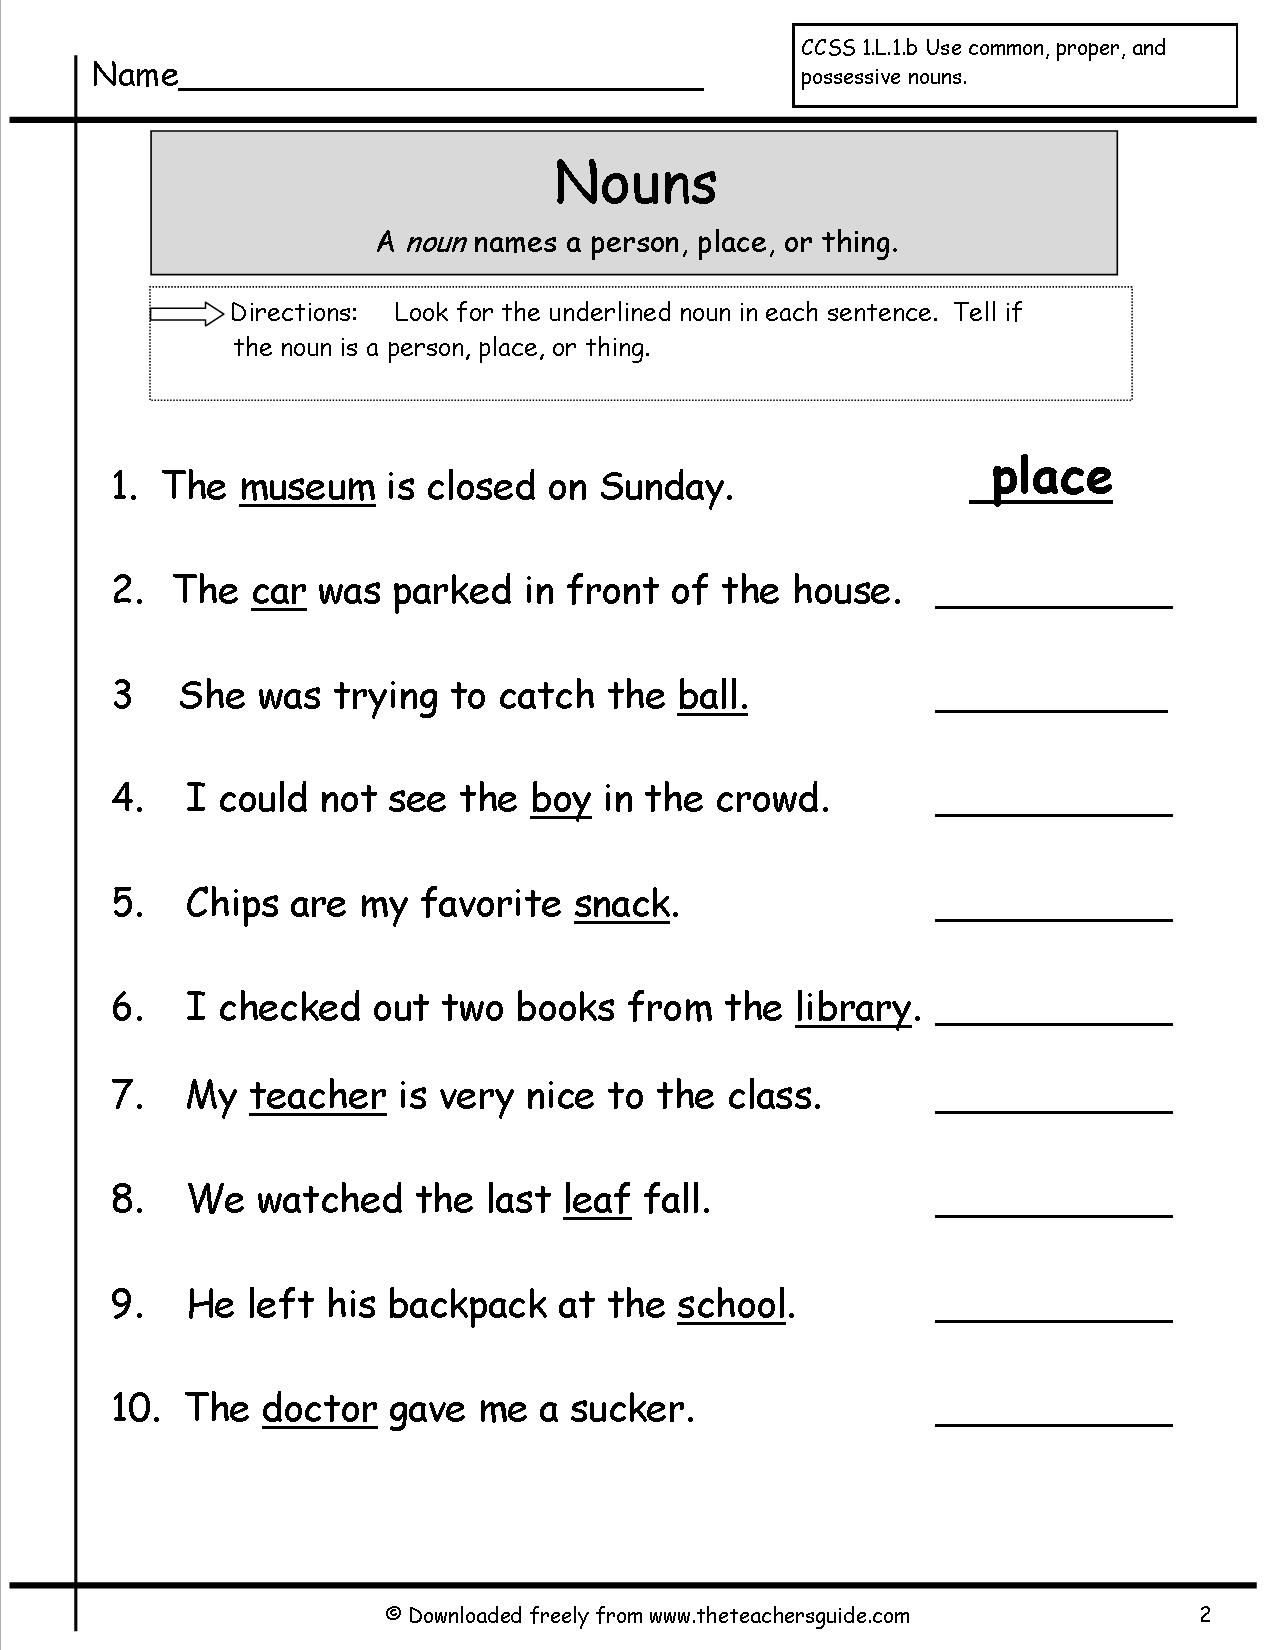 Functions Of Nouns Worksheet With Answers Pdf Grade 6